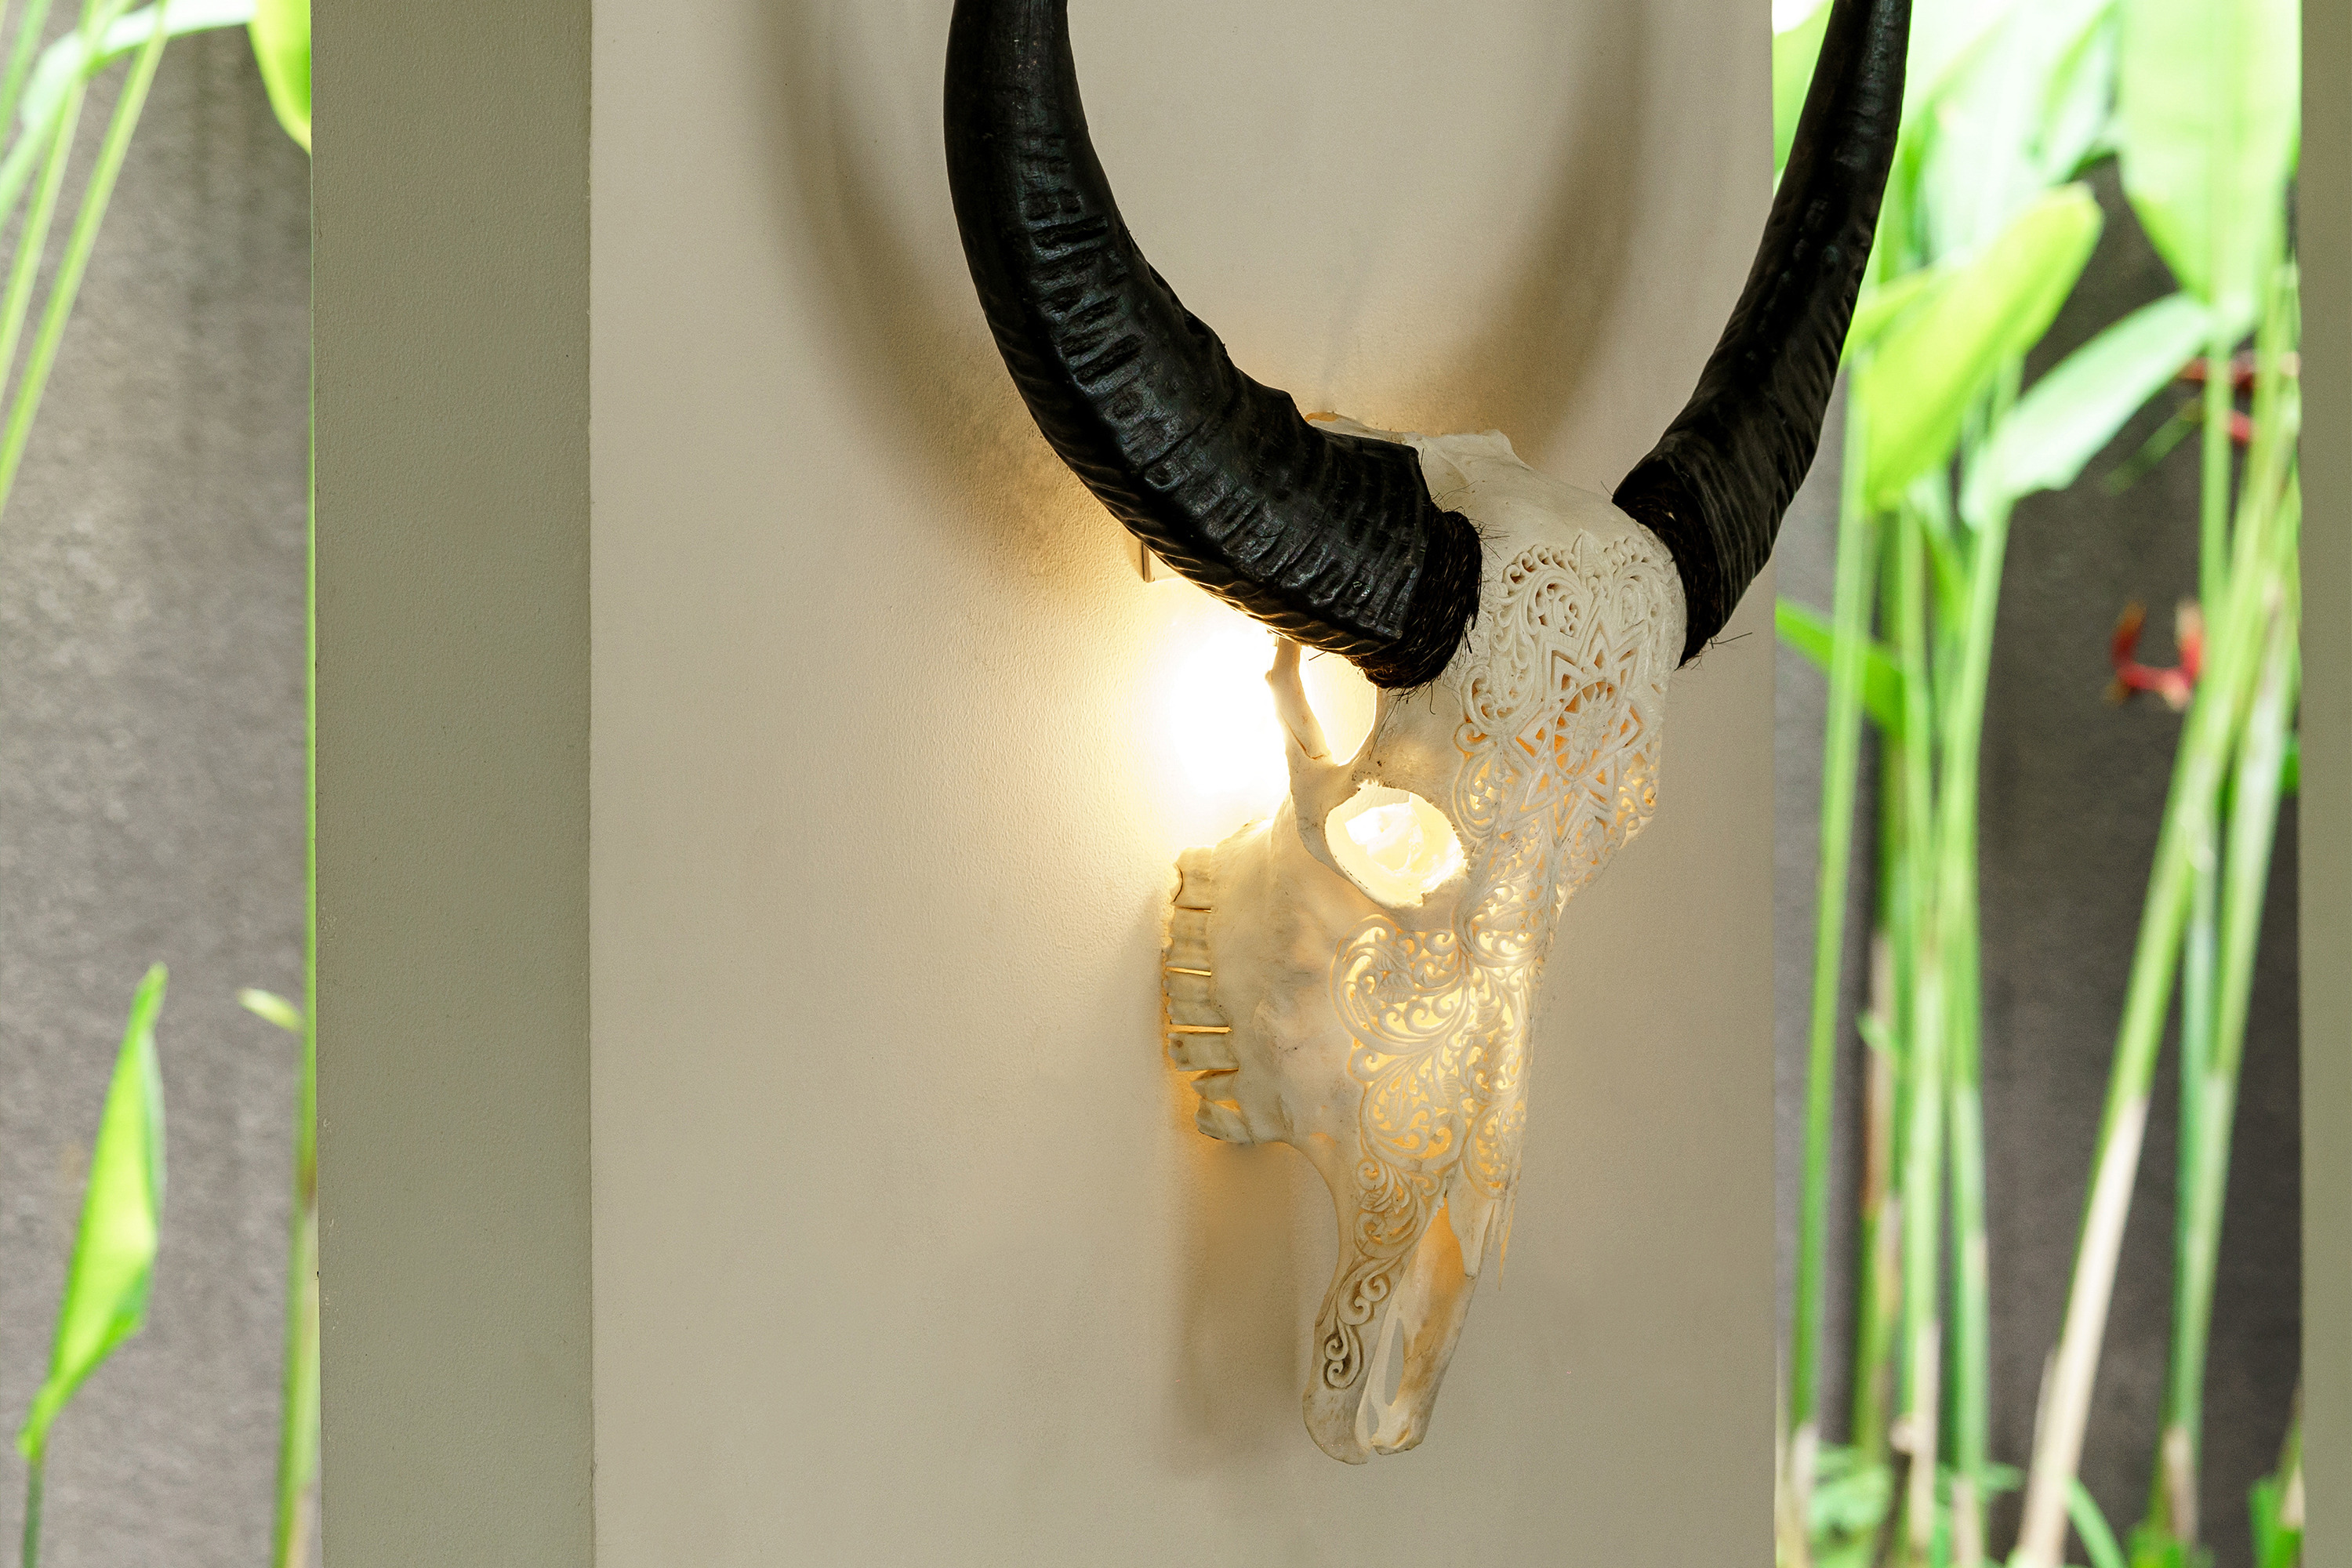 The Carved Buffalo Skull Lamp 'White Mandala' is hanging on a wall.